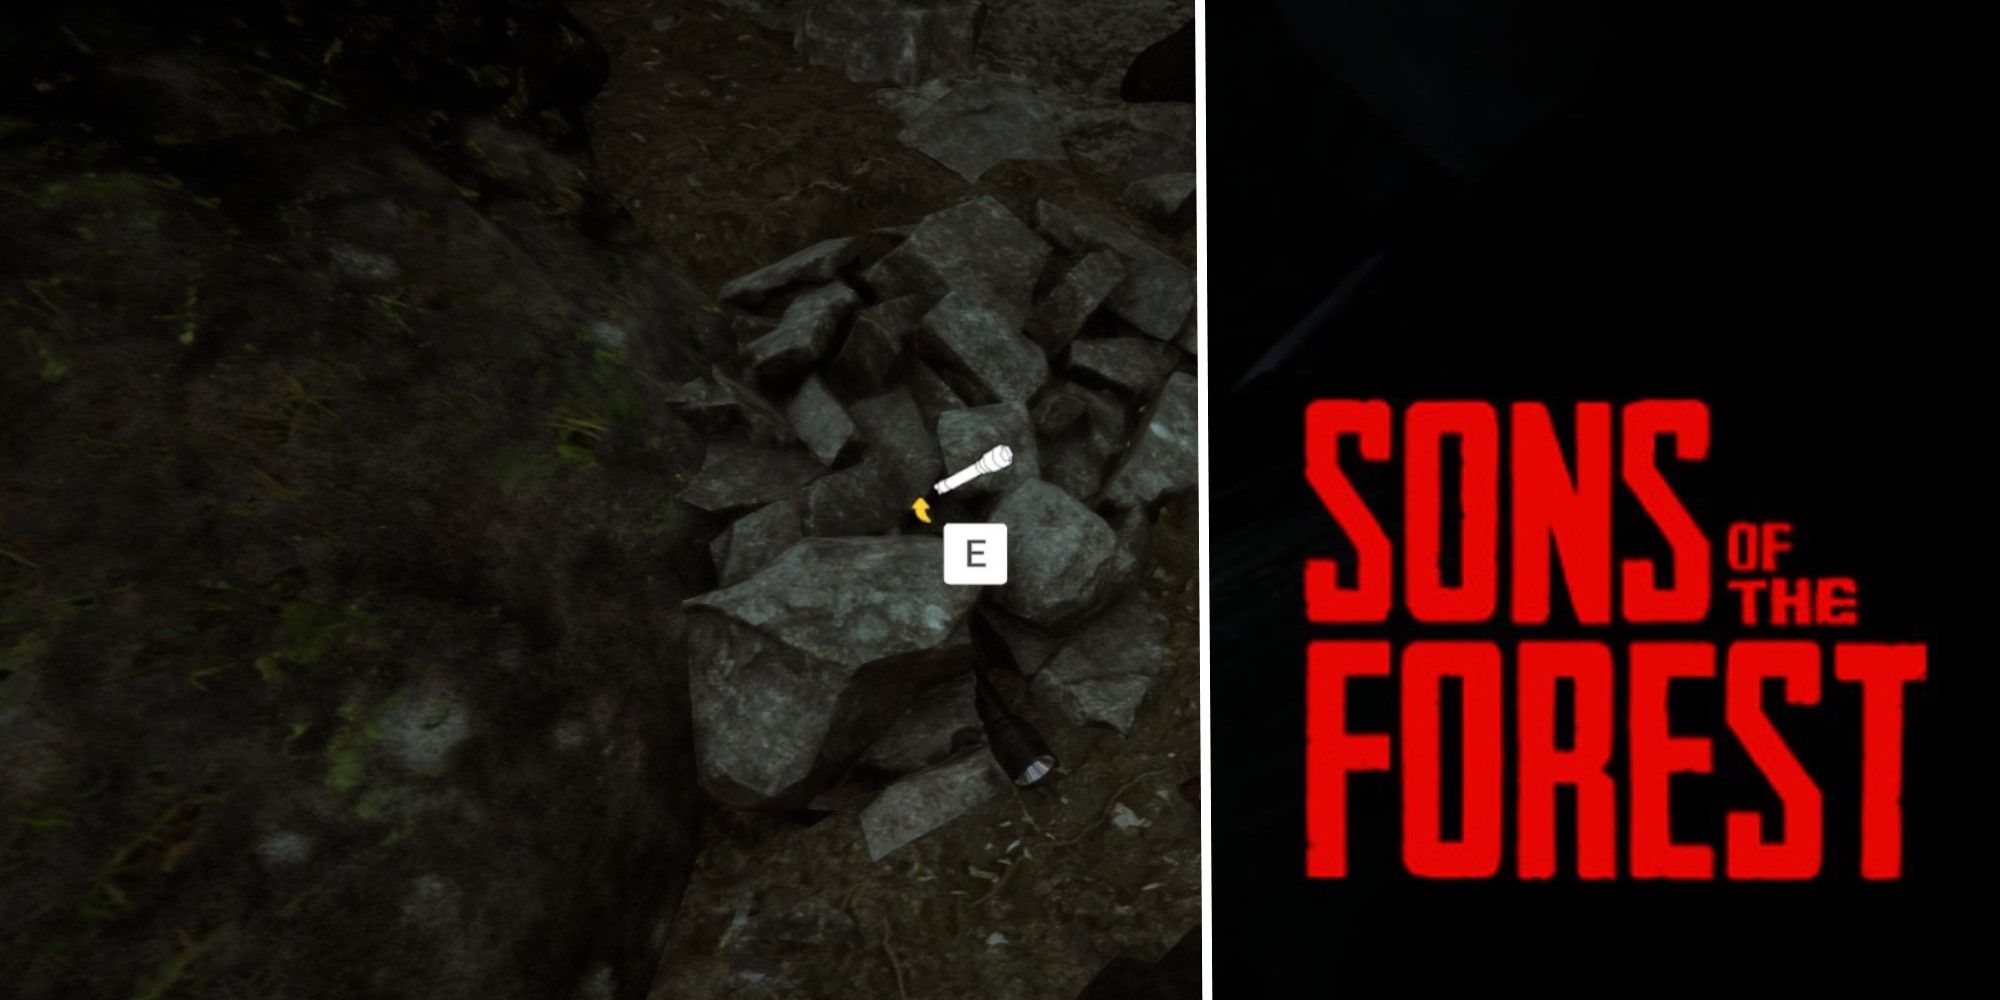 Sons of the Forest Flashlight Guide